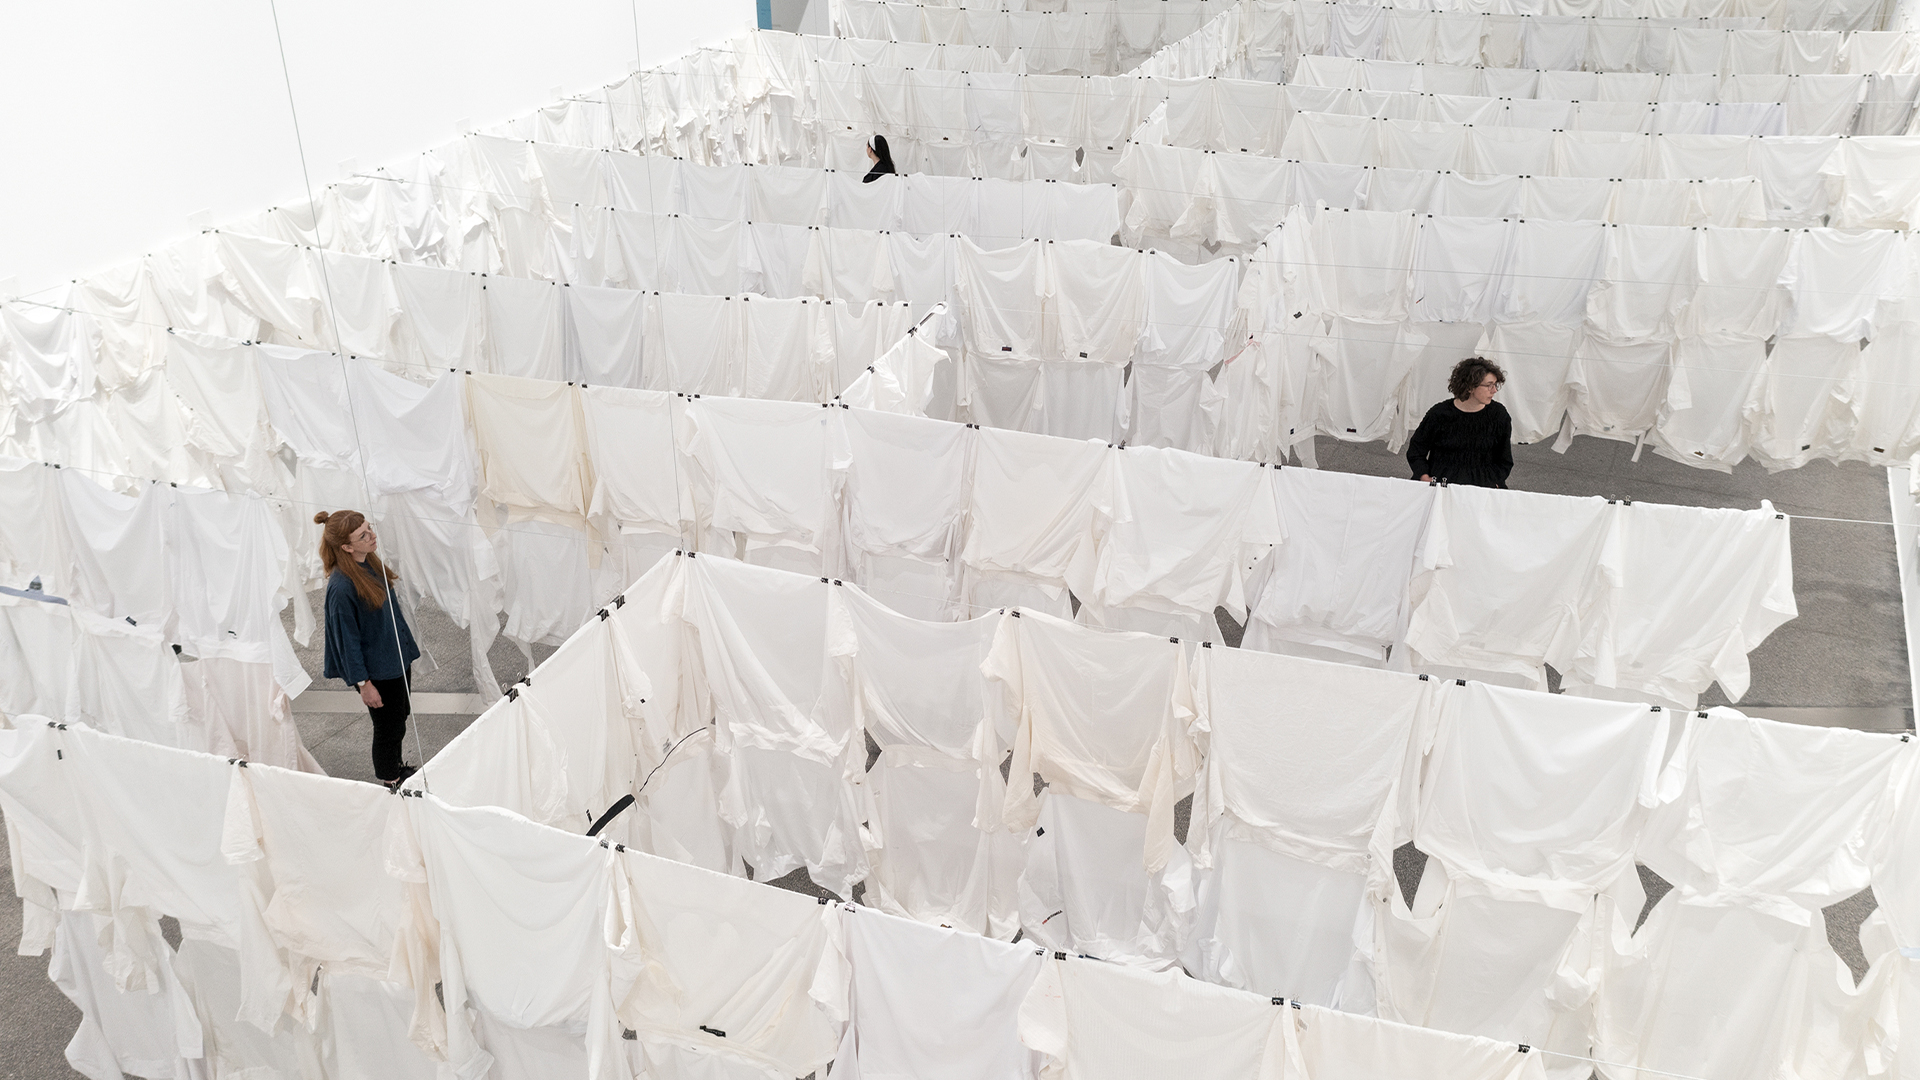 James Nguyen and Budi Sudarto, <em>White shirt installation</em> 2023 (detail), installation view, Australian Centre for Contemporary Art, Melbourne. Courtesy the artists. Photograph: Andrew Curtis